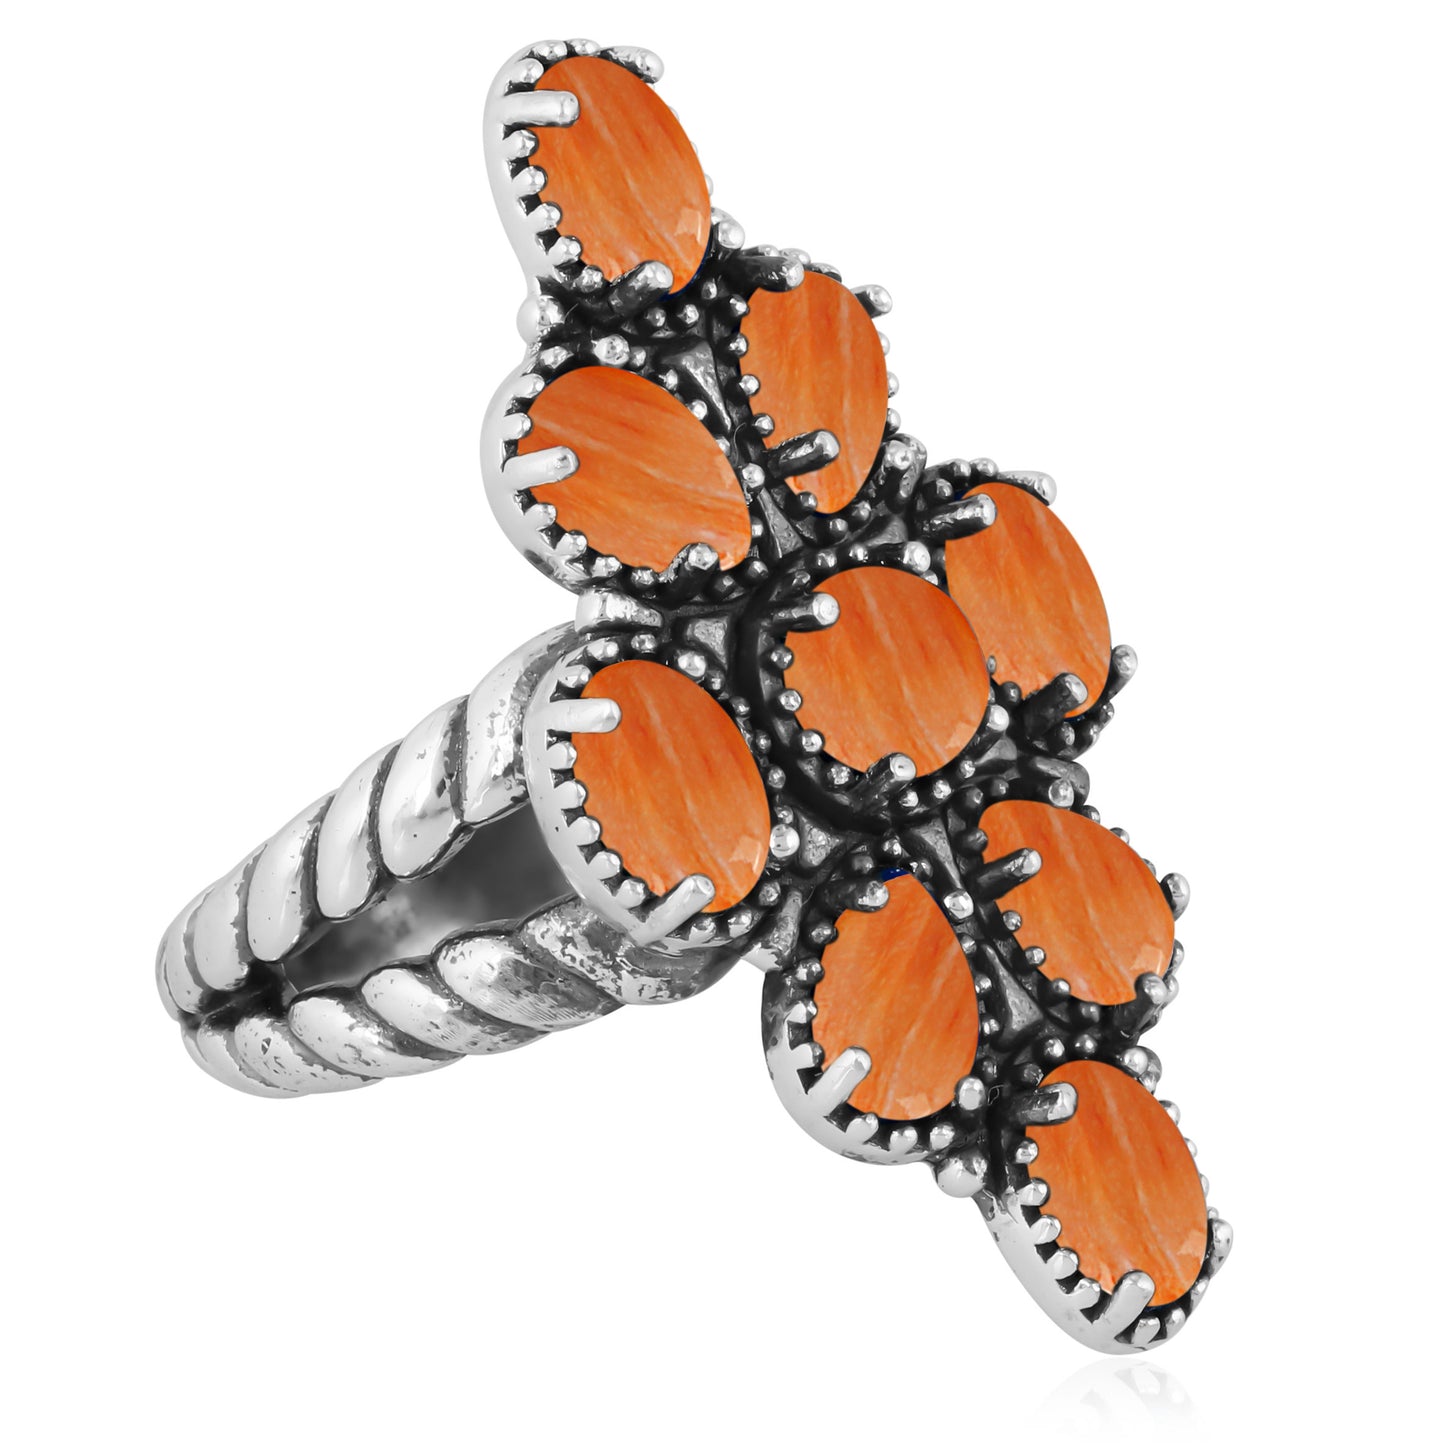 Southwestern Orange Wildflower Cluster Ring- Featuring an Array of Orange Spiny Oyster Gemstones and Sterling Silver Rope Band, Sizes 6 - 11